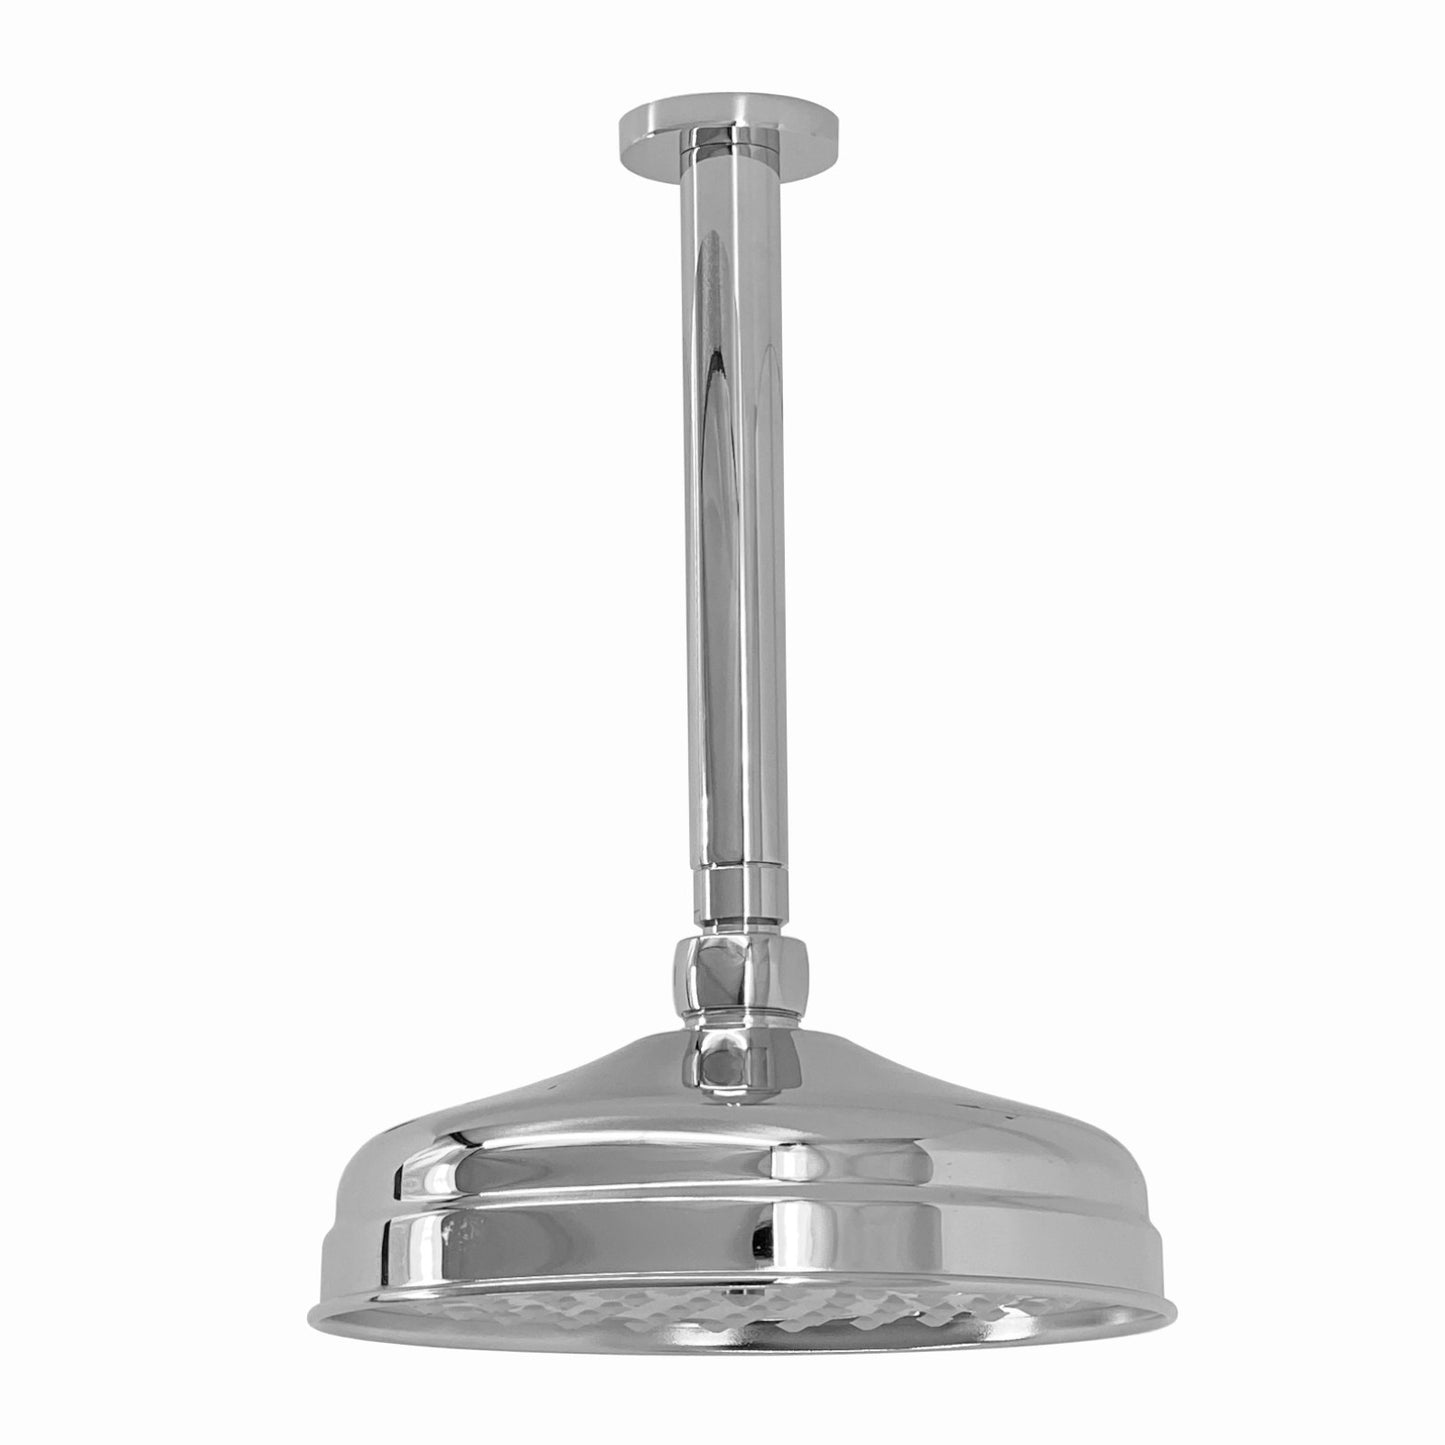 SH0249-03-RA044-01-traditional-ceiling-fixed-apron-brass-shower-head-8-with-180mm-ceiling-shower-arm-chrome